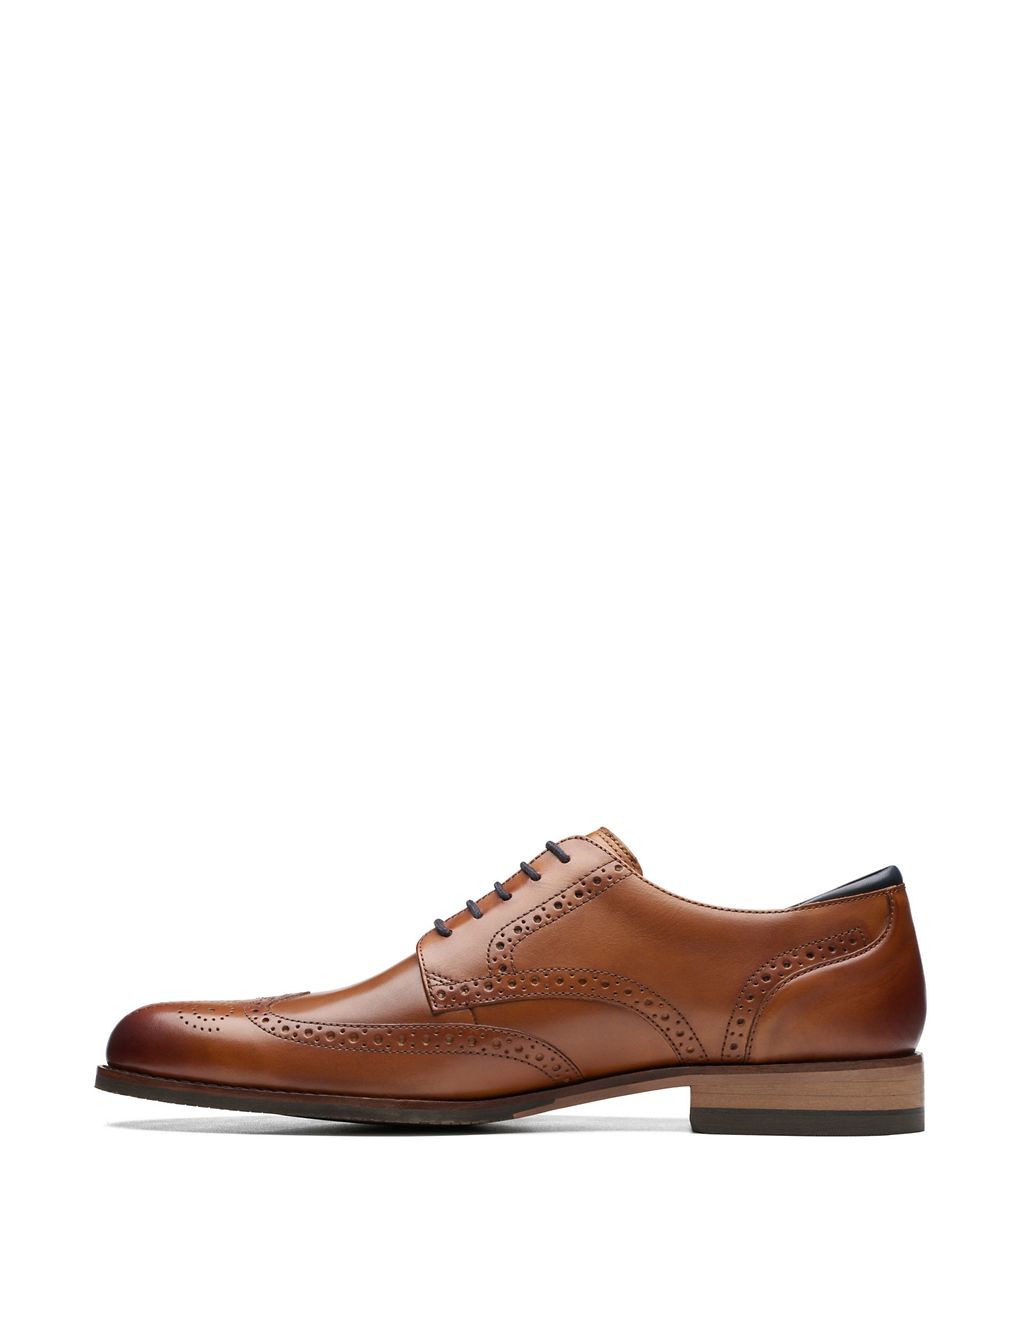 Leather Brogues 4 of 7